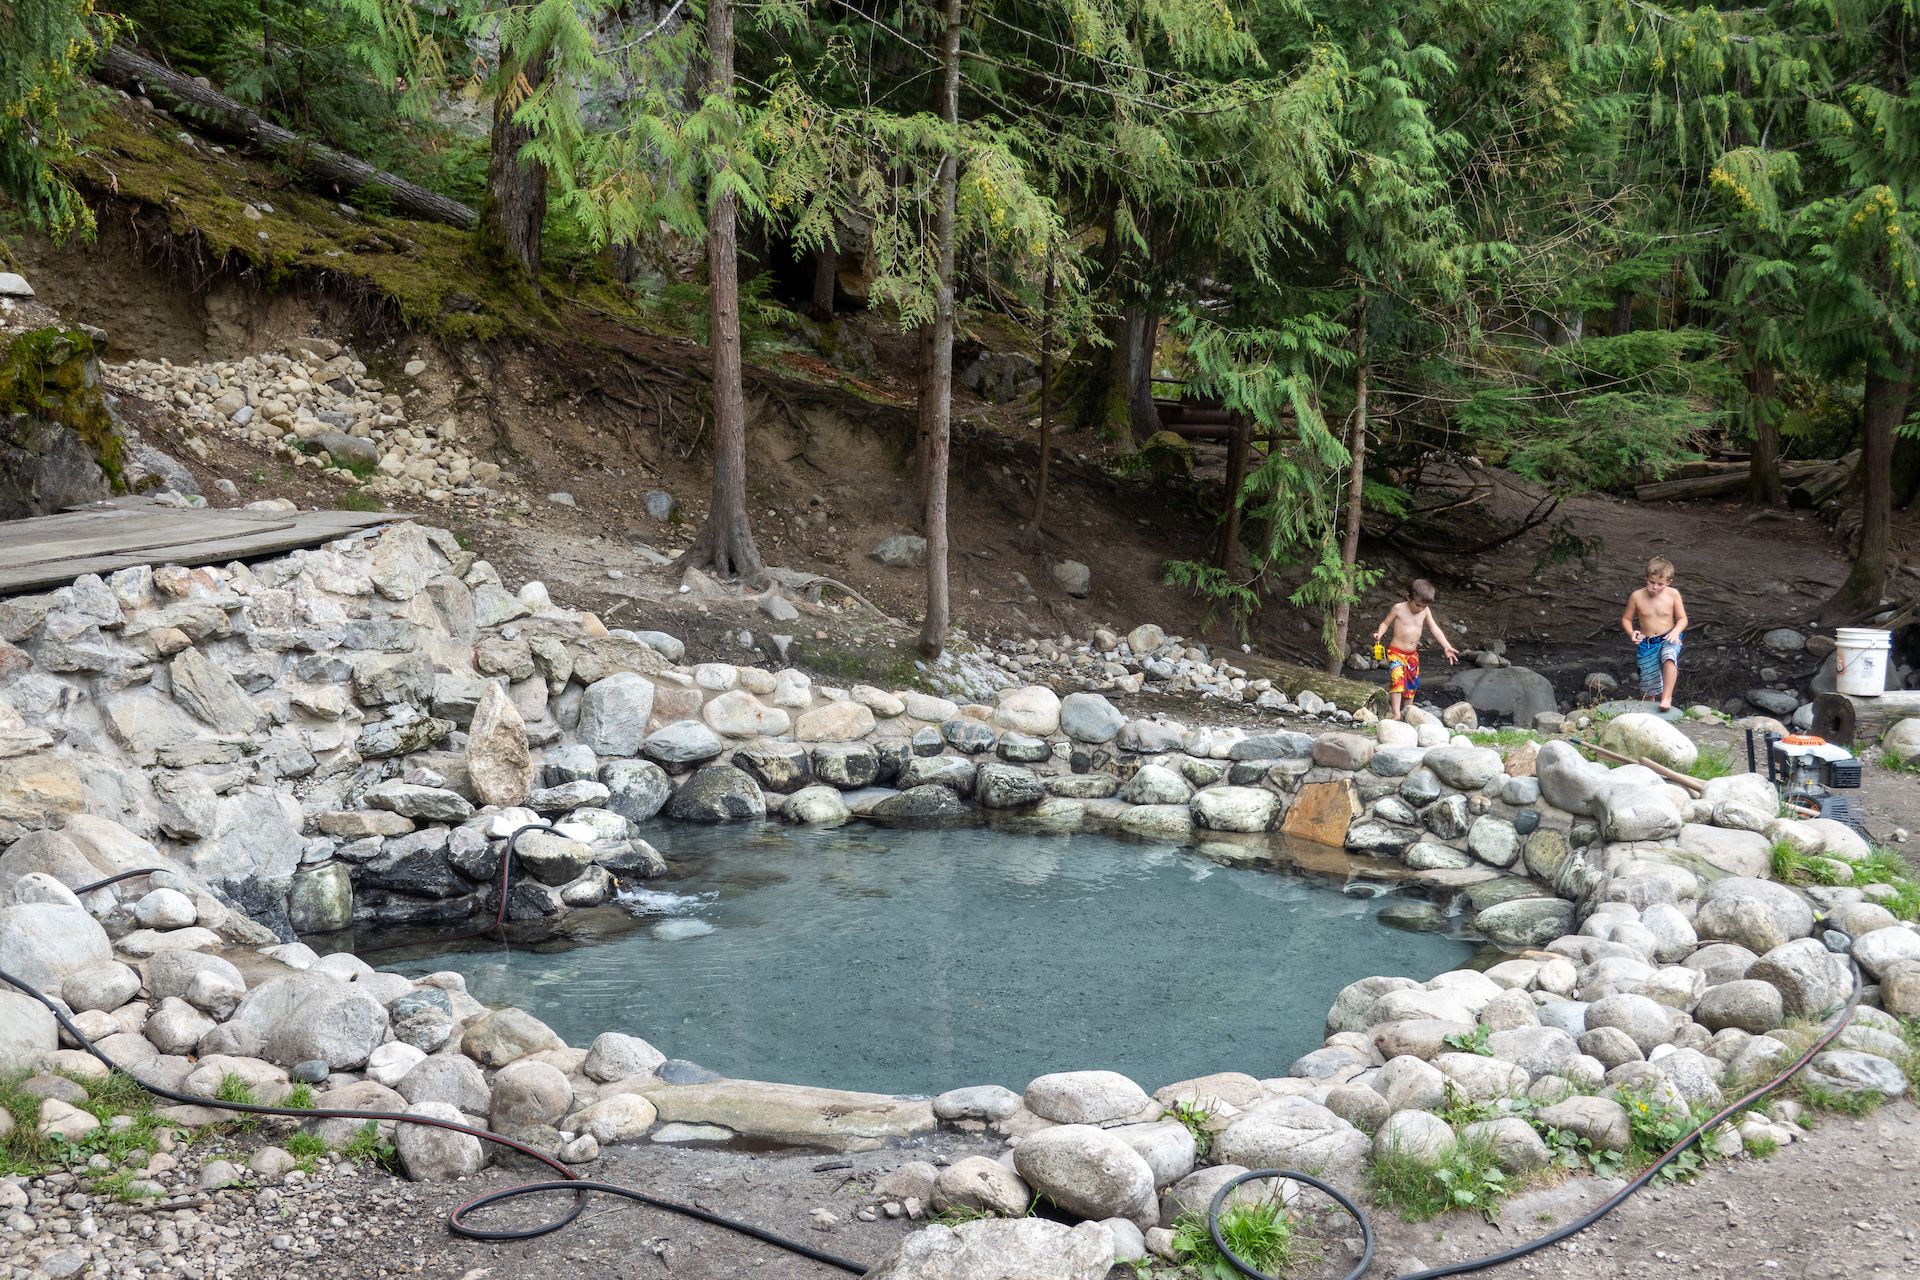 One of the 3 man-made pool at the Halfway River Hot Springs